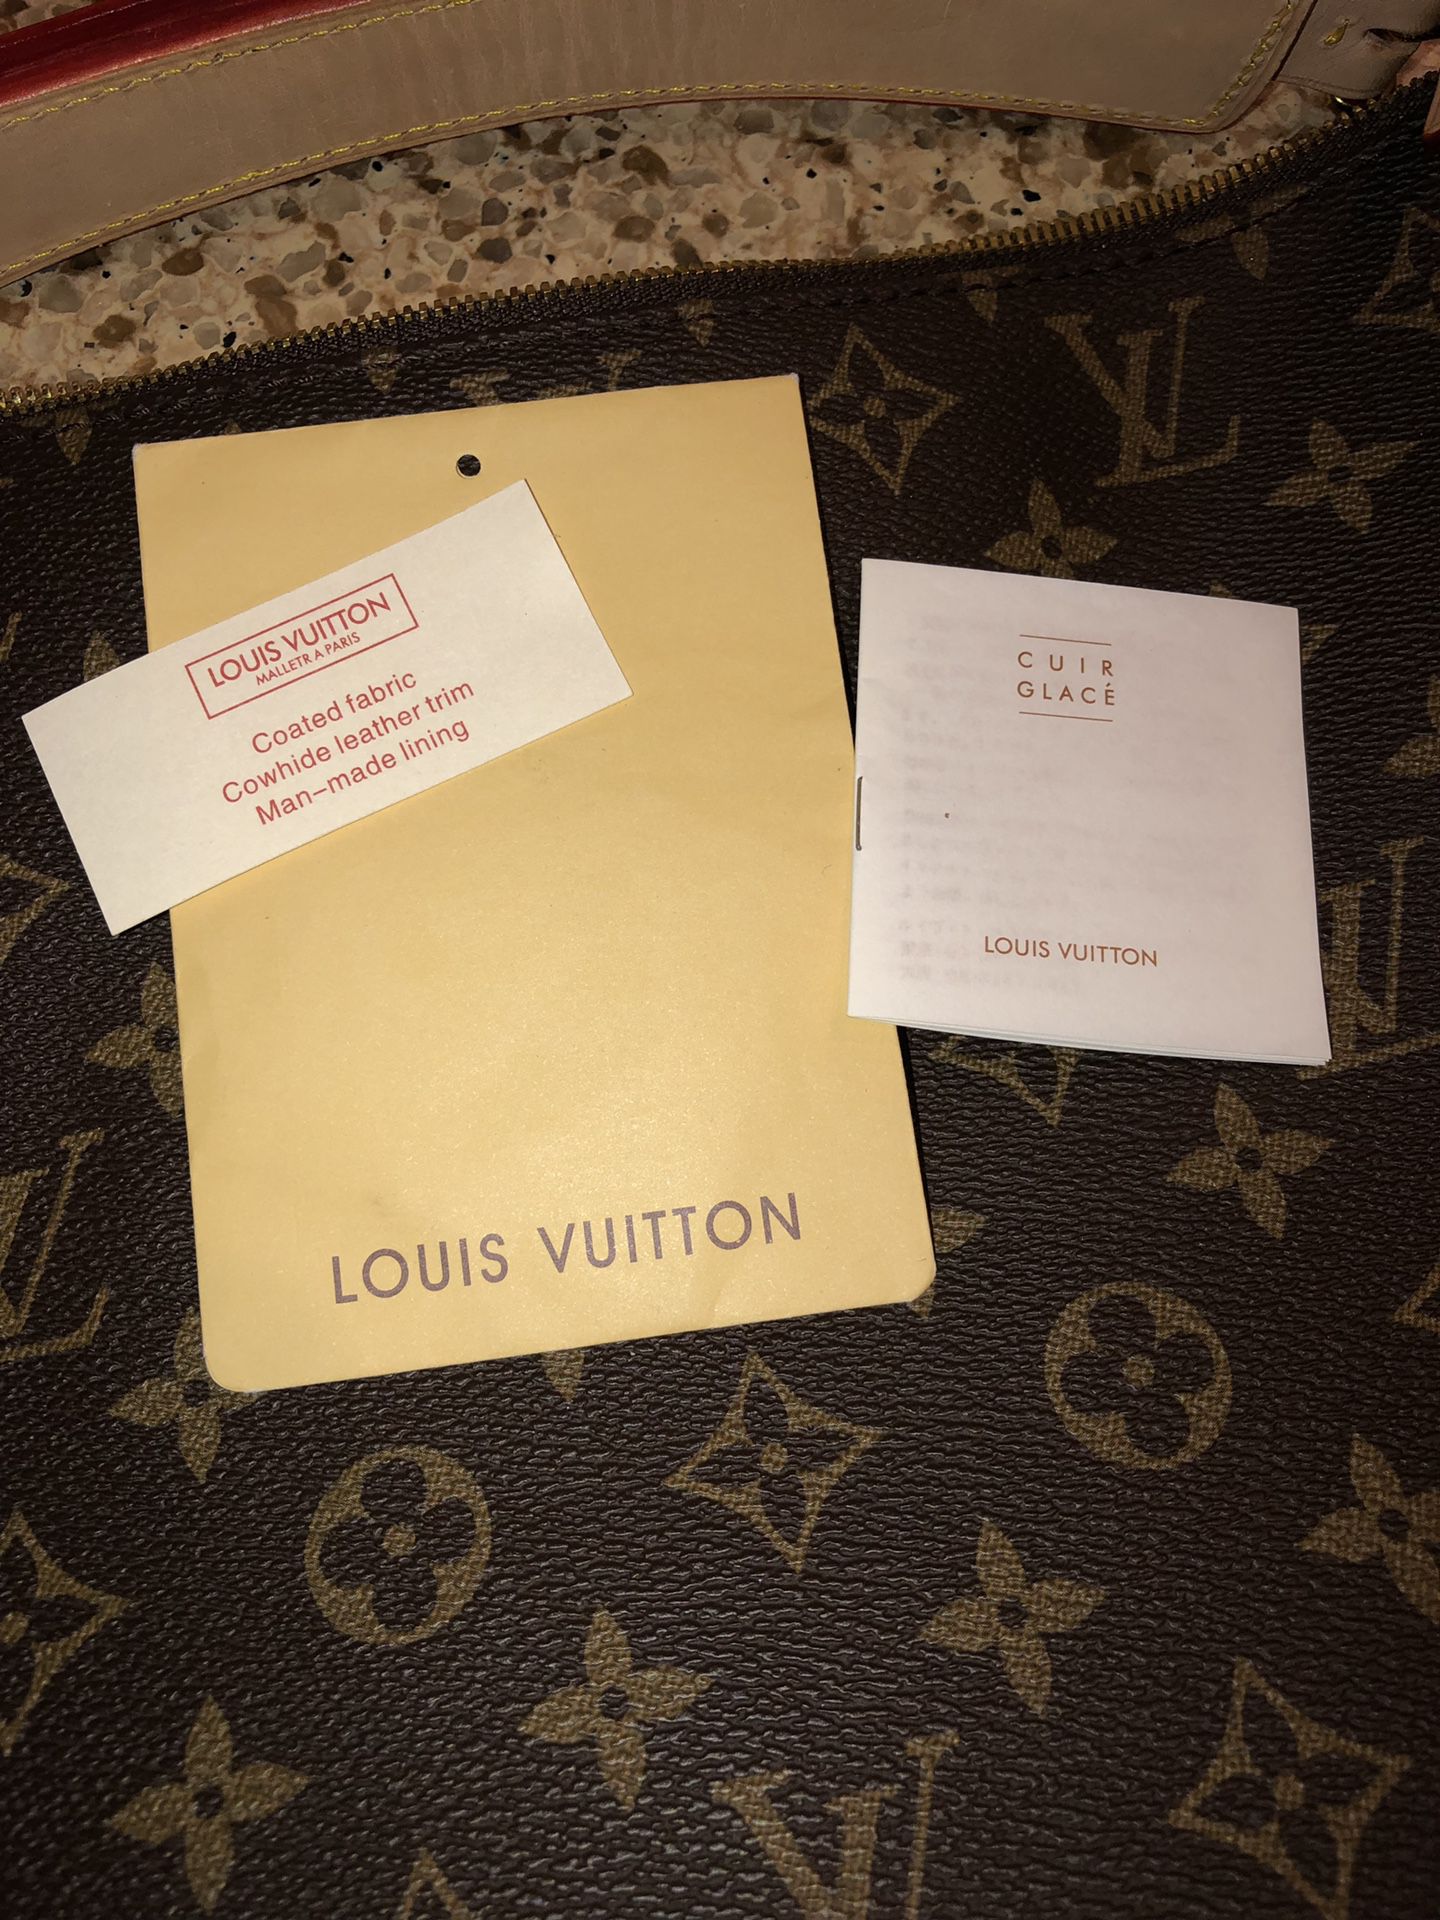 Louis Vuitton Sully Monogram Empreinte PM Noir Black in Leather with Brass  for Sale in Buffalo, NY - OfferUp